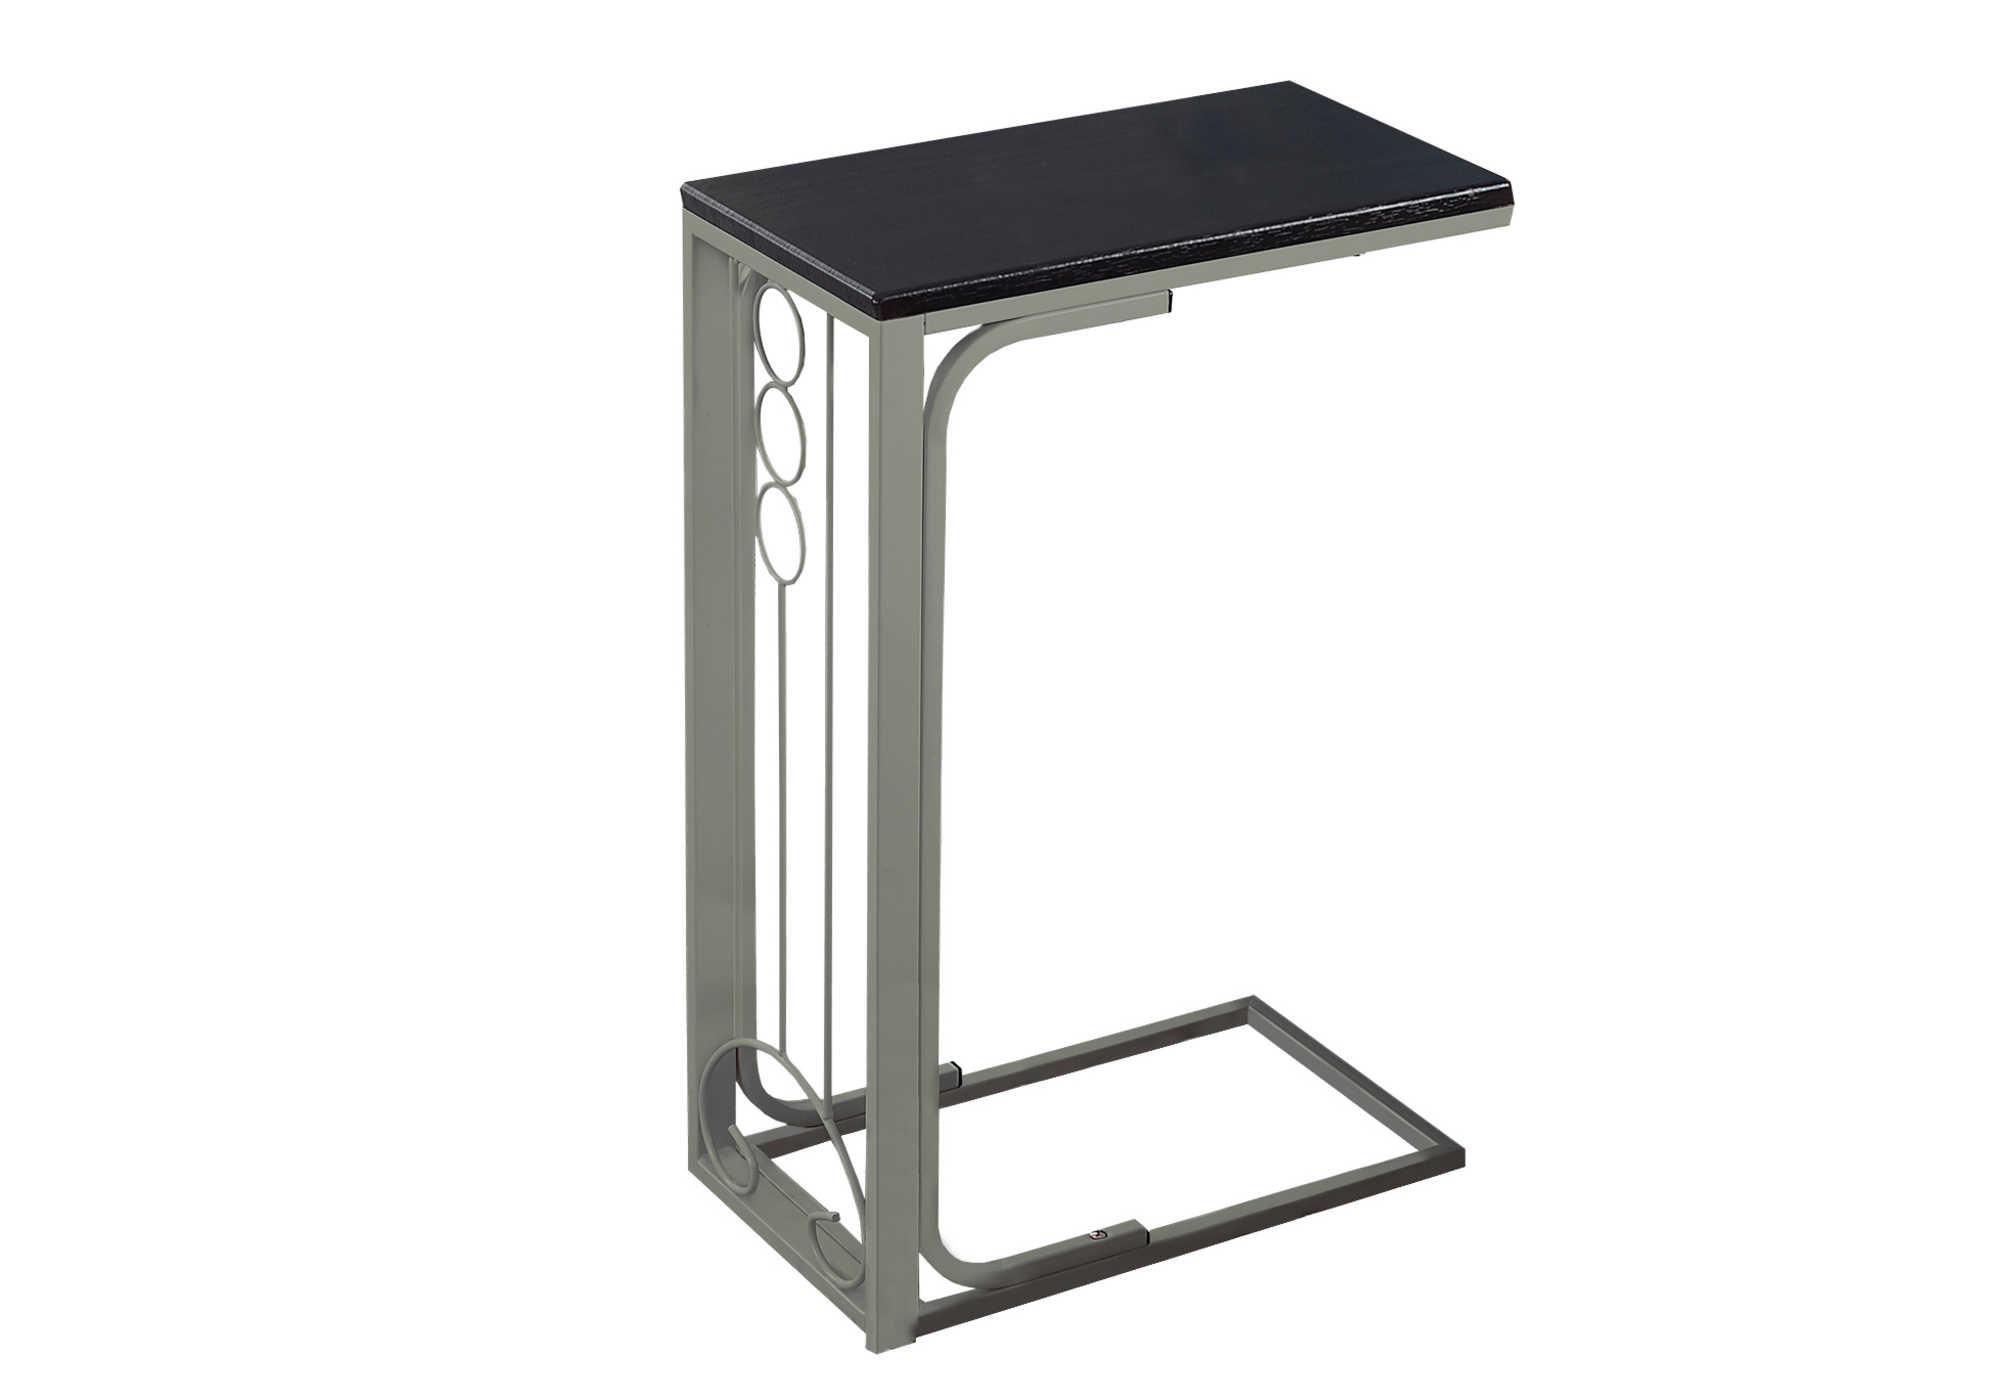 BEDROOM ACCENT TABLE - ESPRESSO TOP / CHAMPAGNE METAL